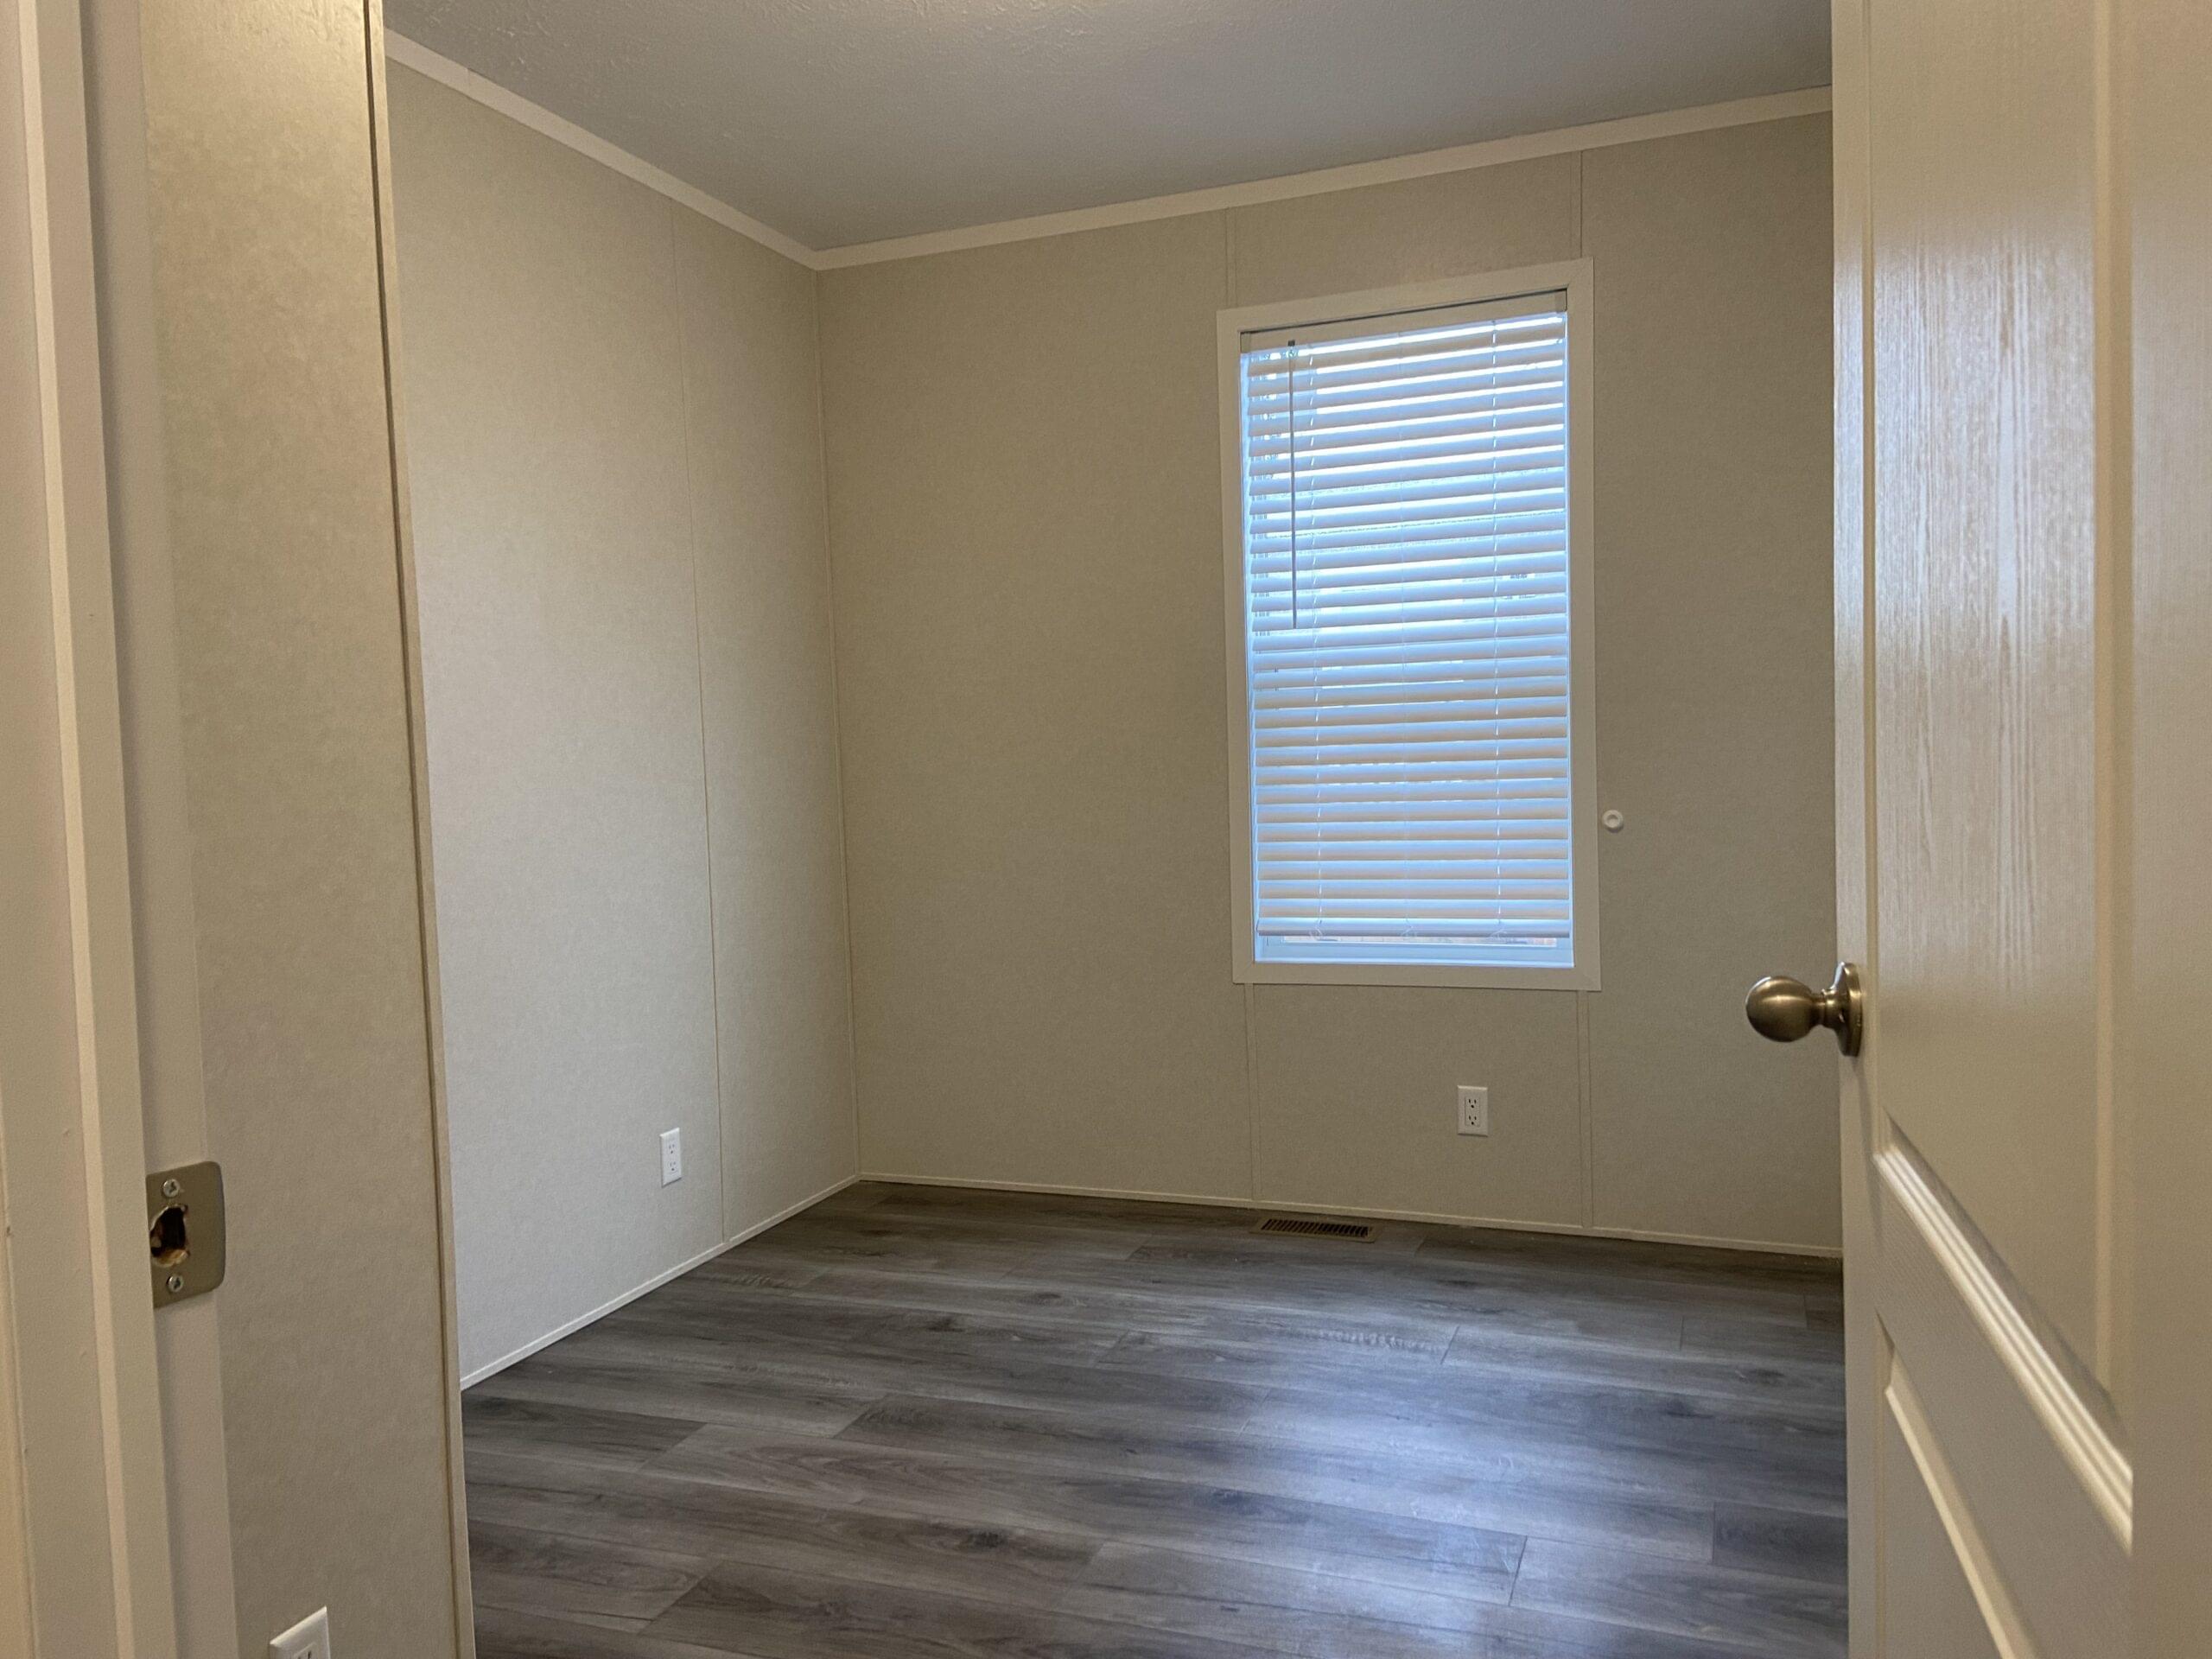 BRAND NEW – MOVE-IN READY!